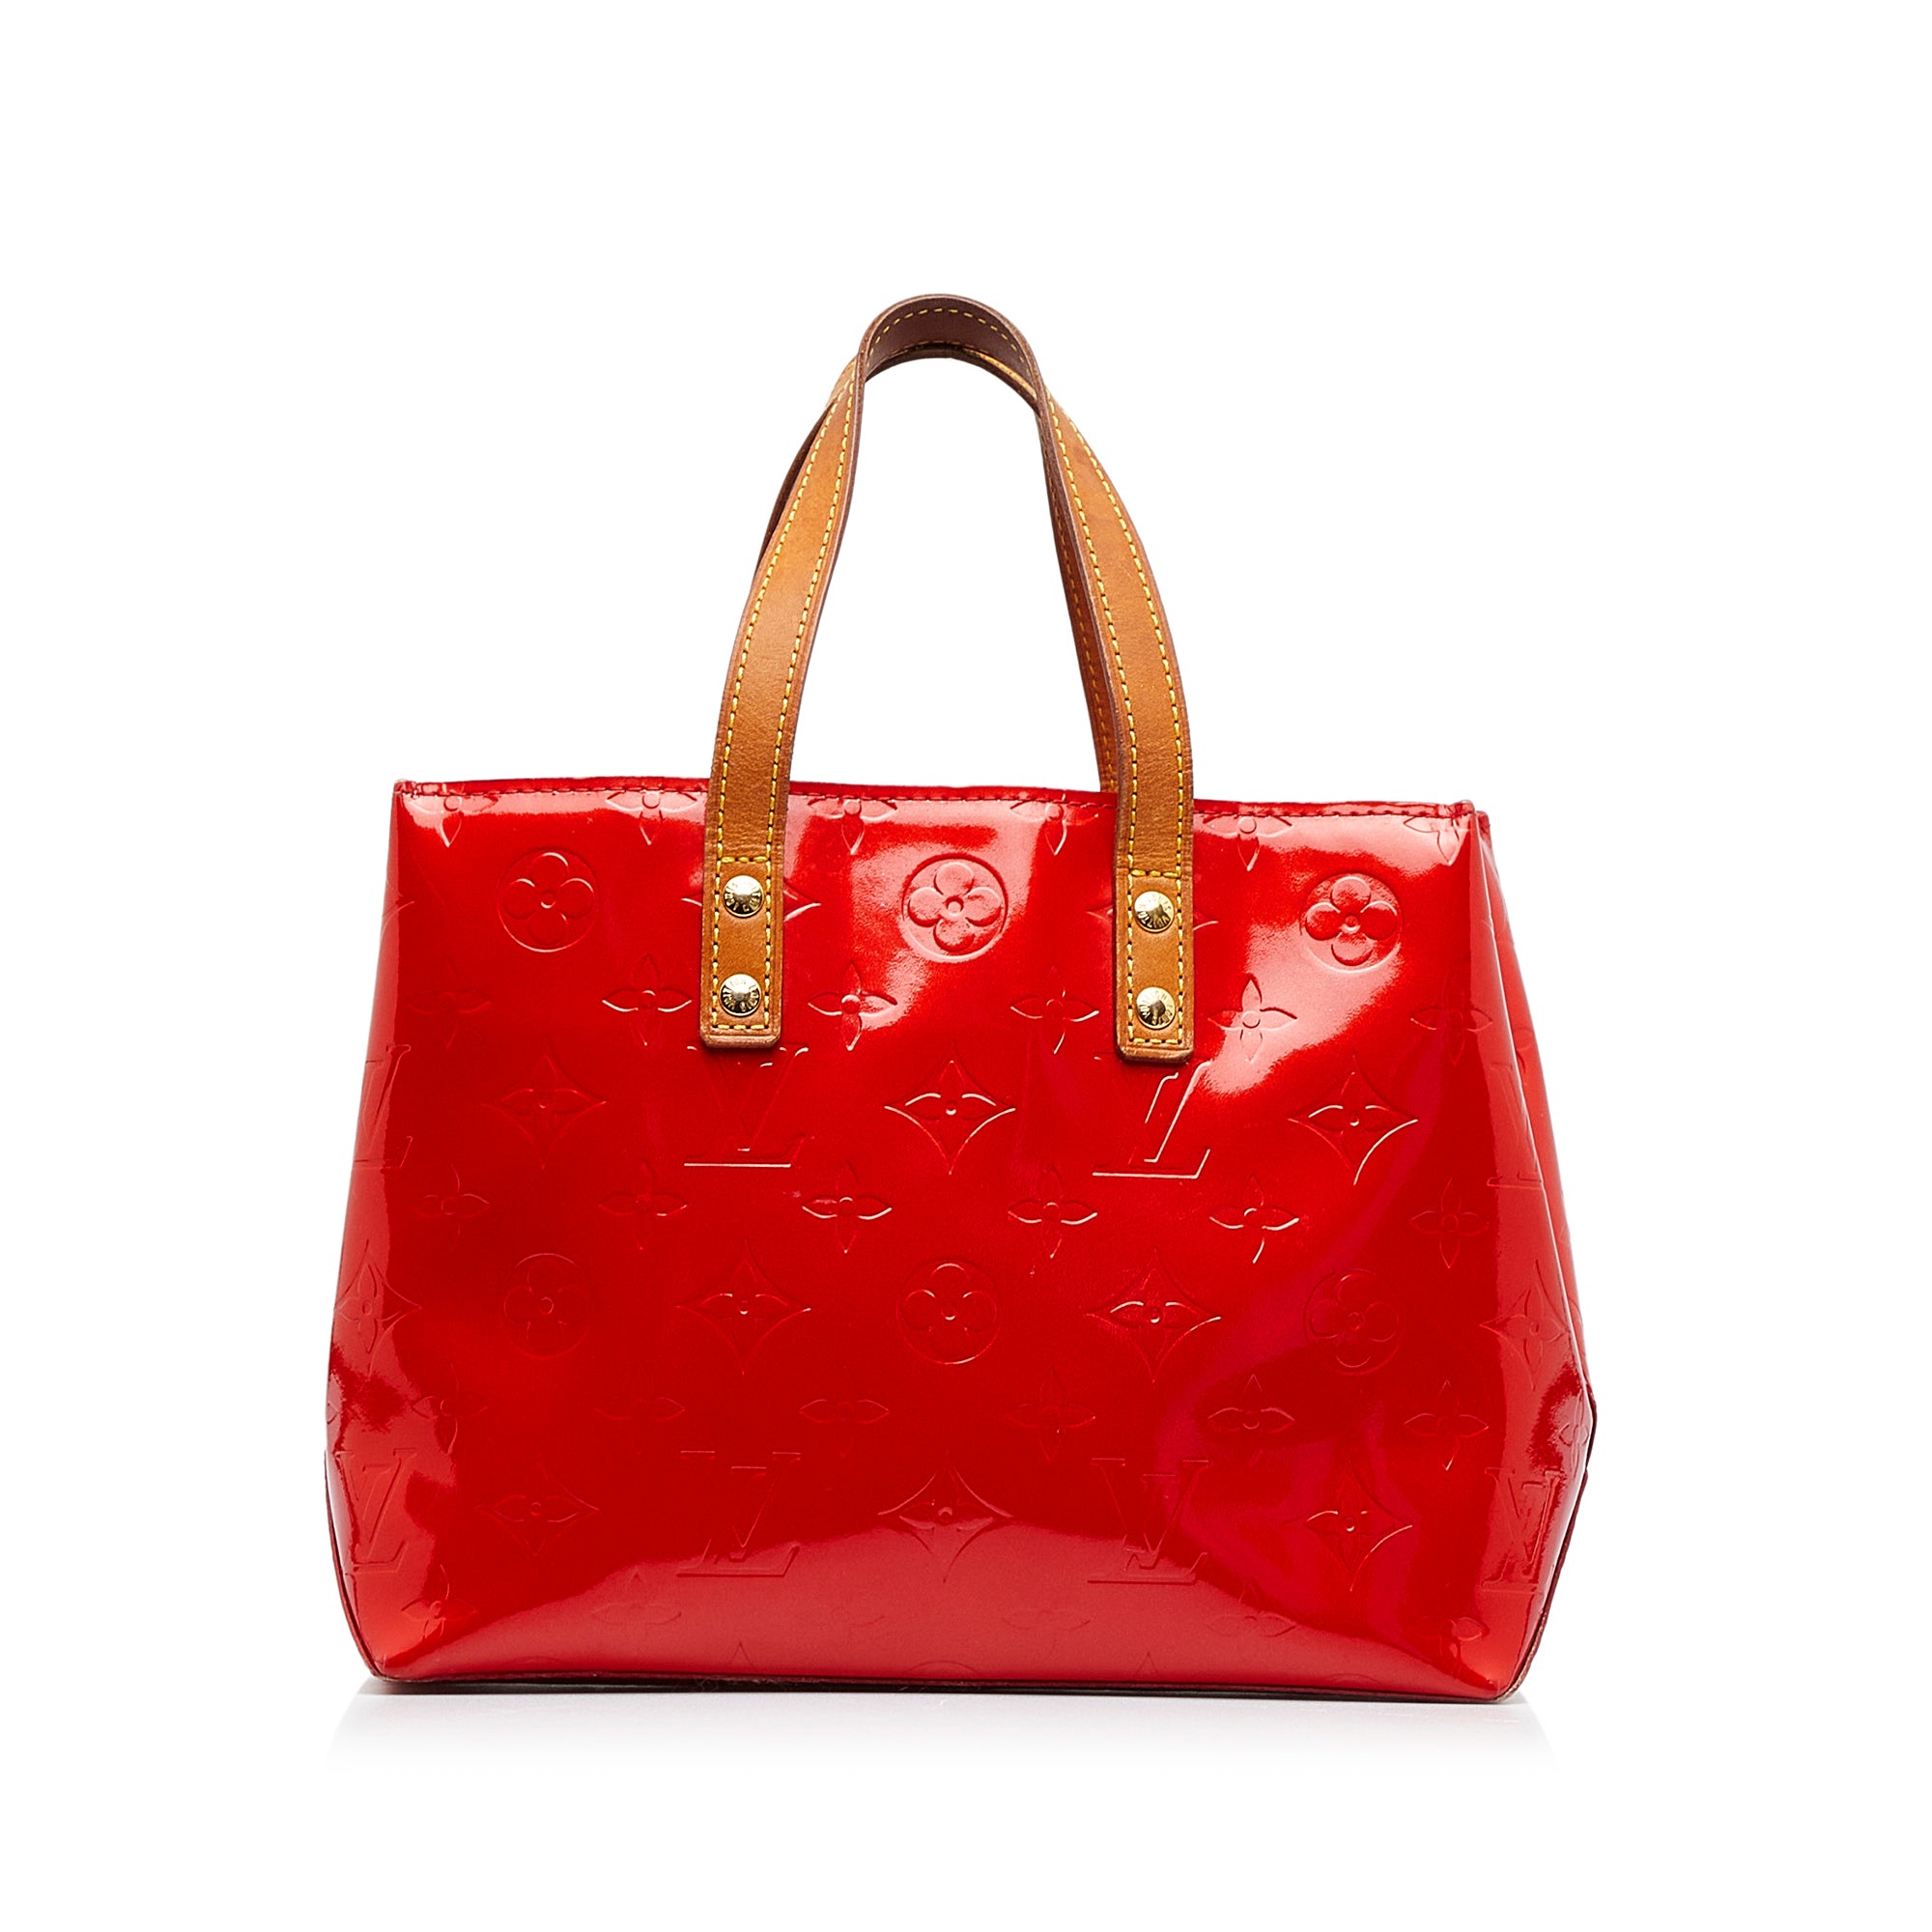 Louis Vuitton, Bags, Louis Vuitton Real Vernis Small Red Tote